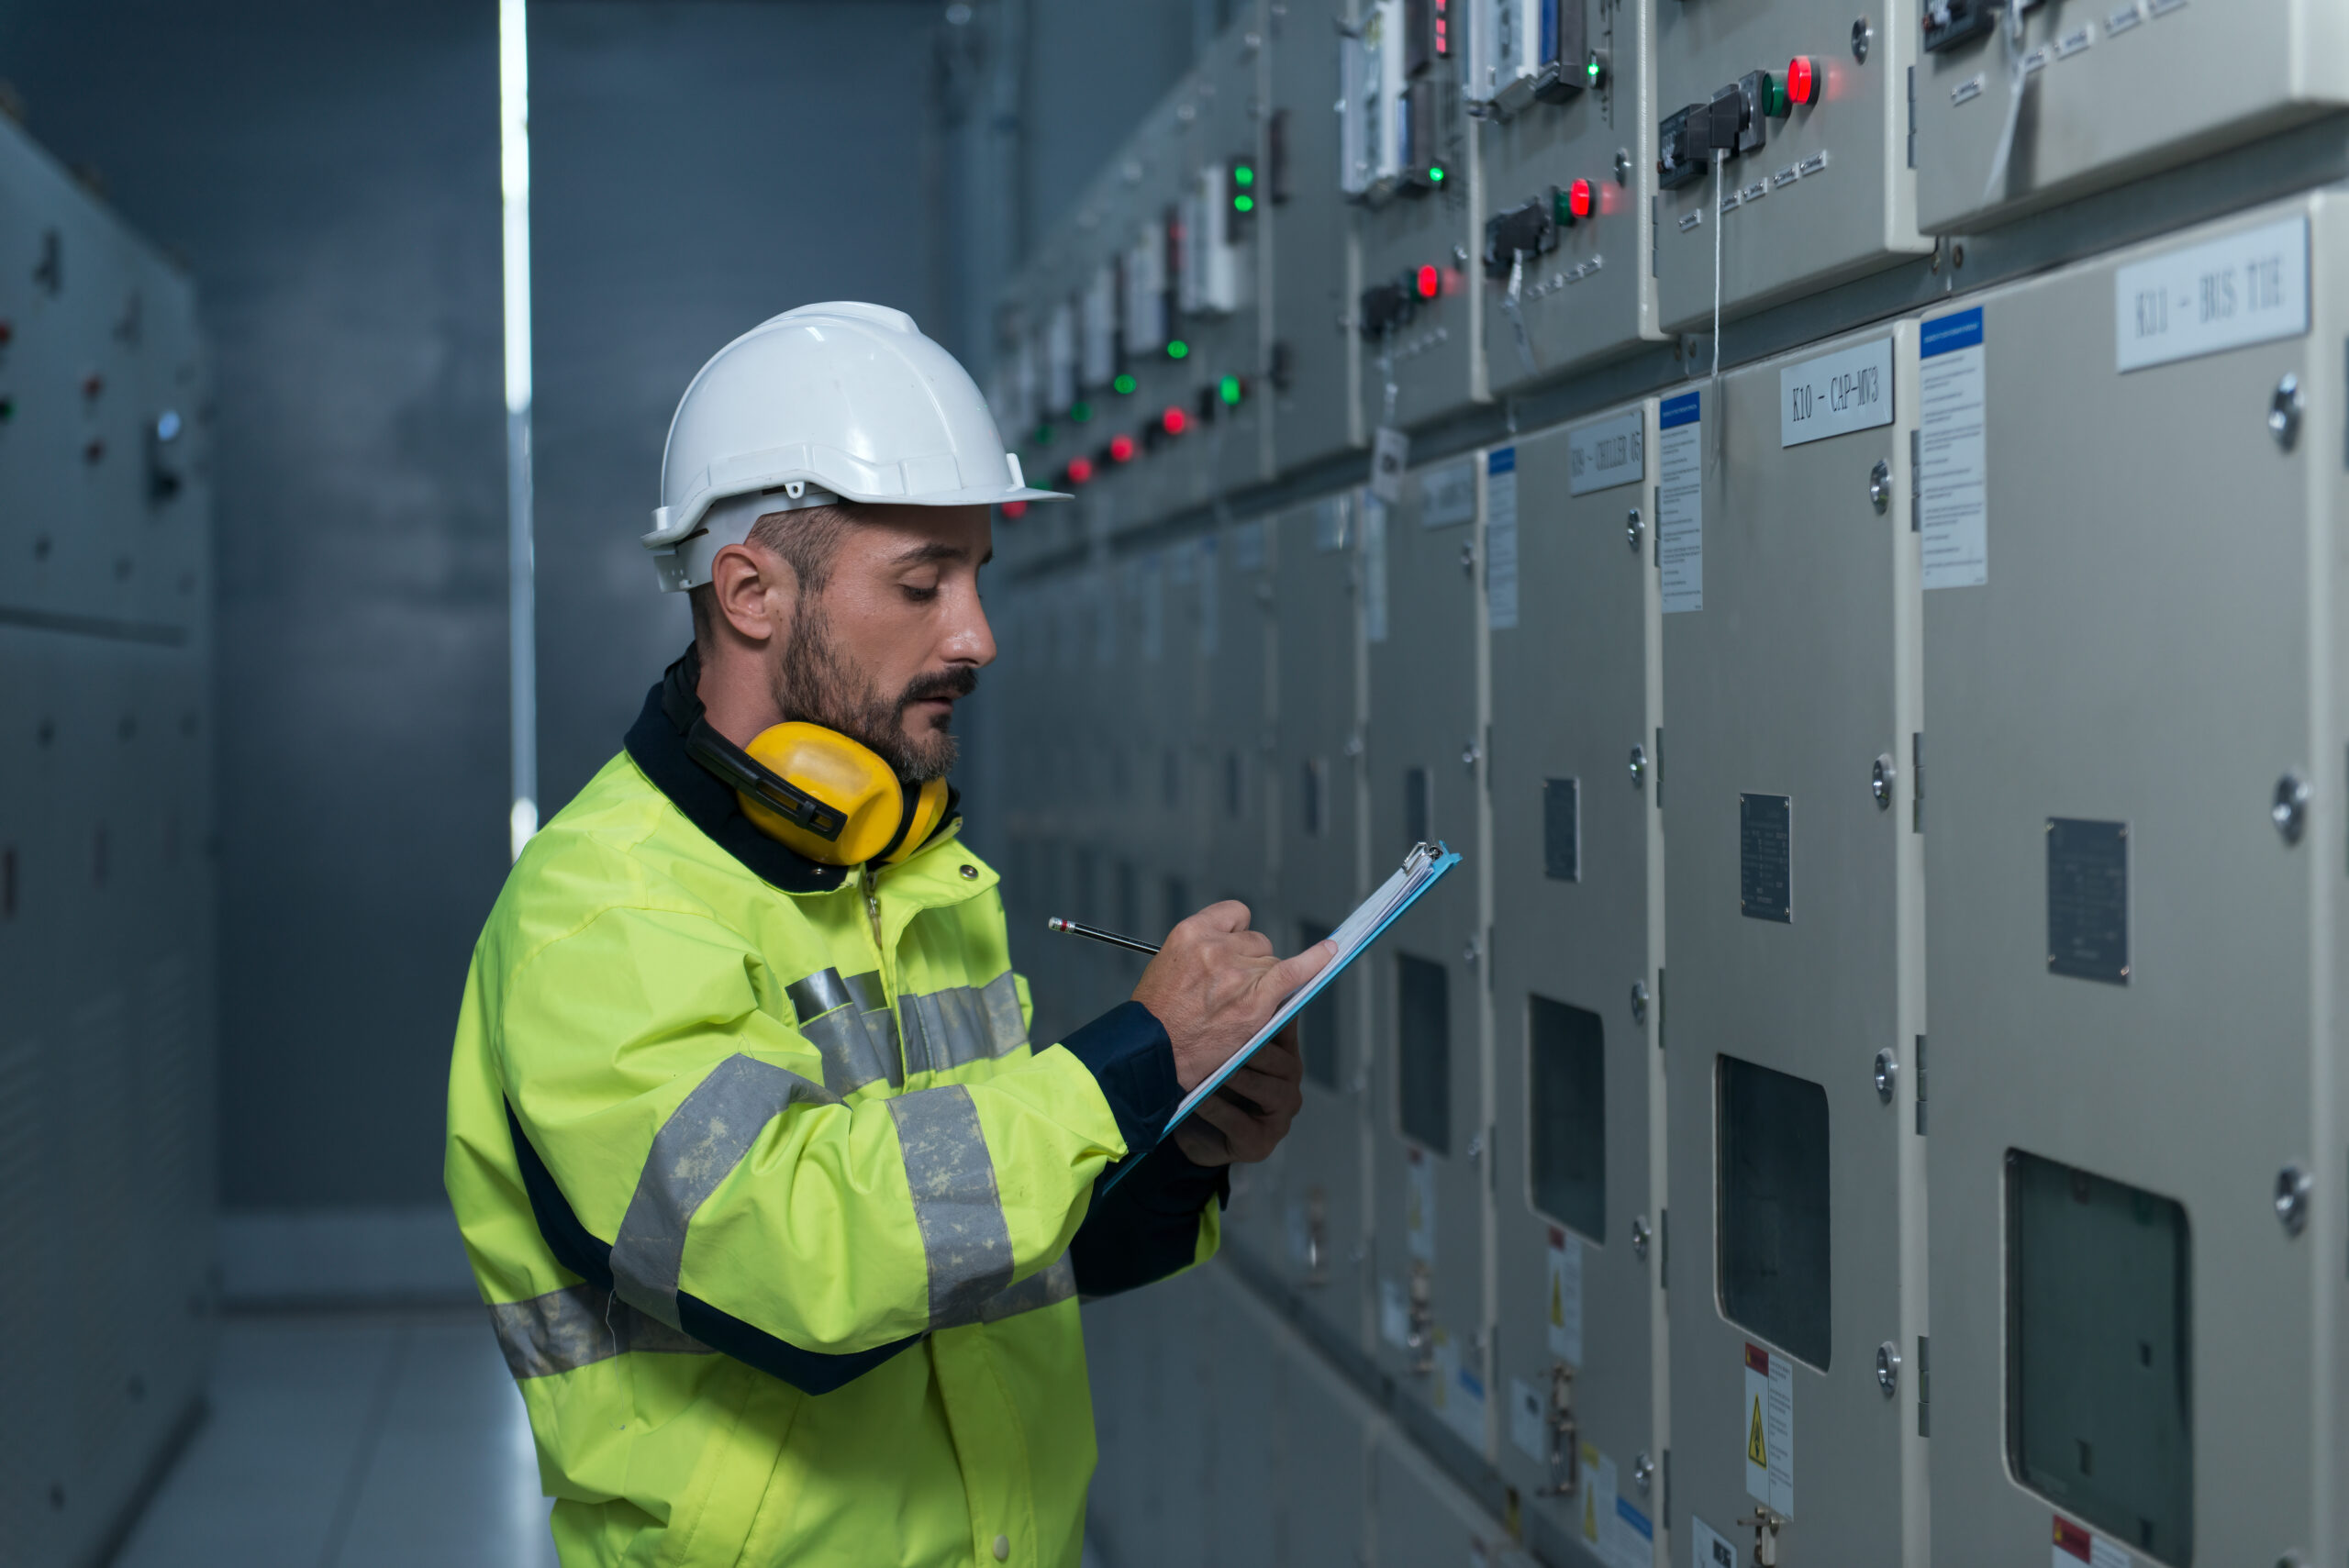 Engineer,Working,On,The,Checking,Status,Switchgear,Electrical,Energy,Distribution